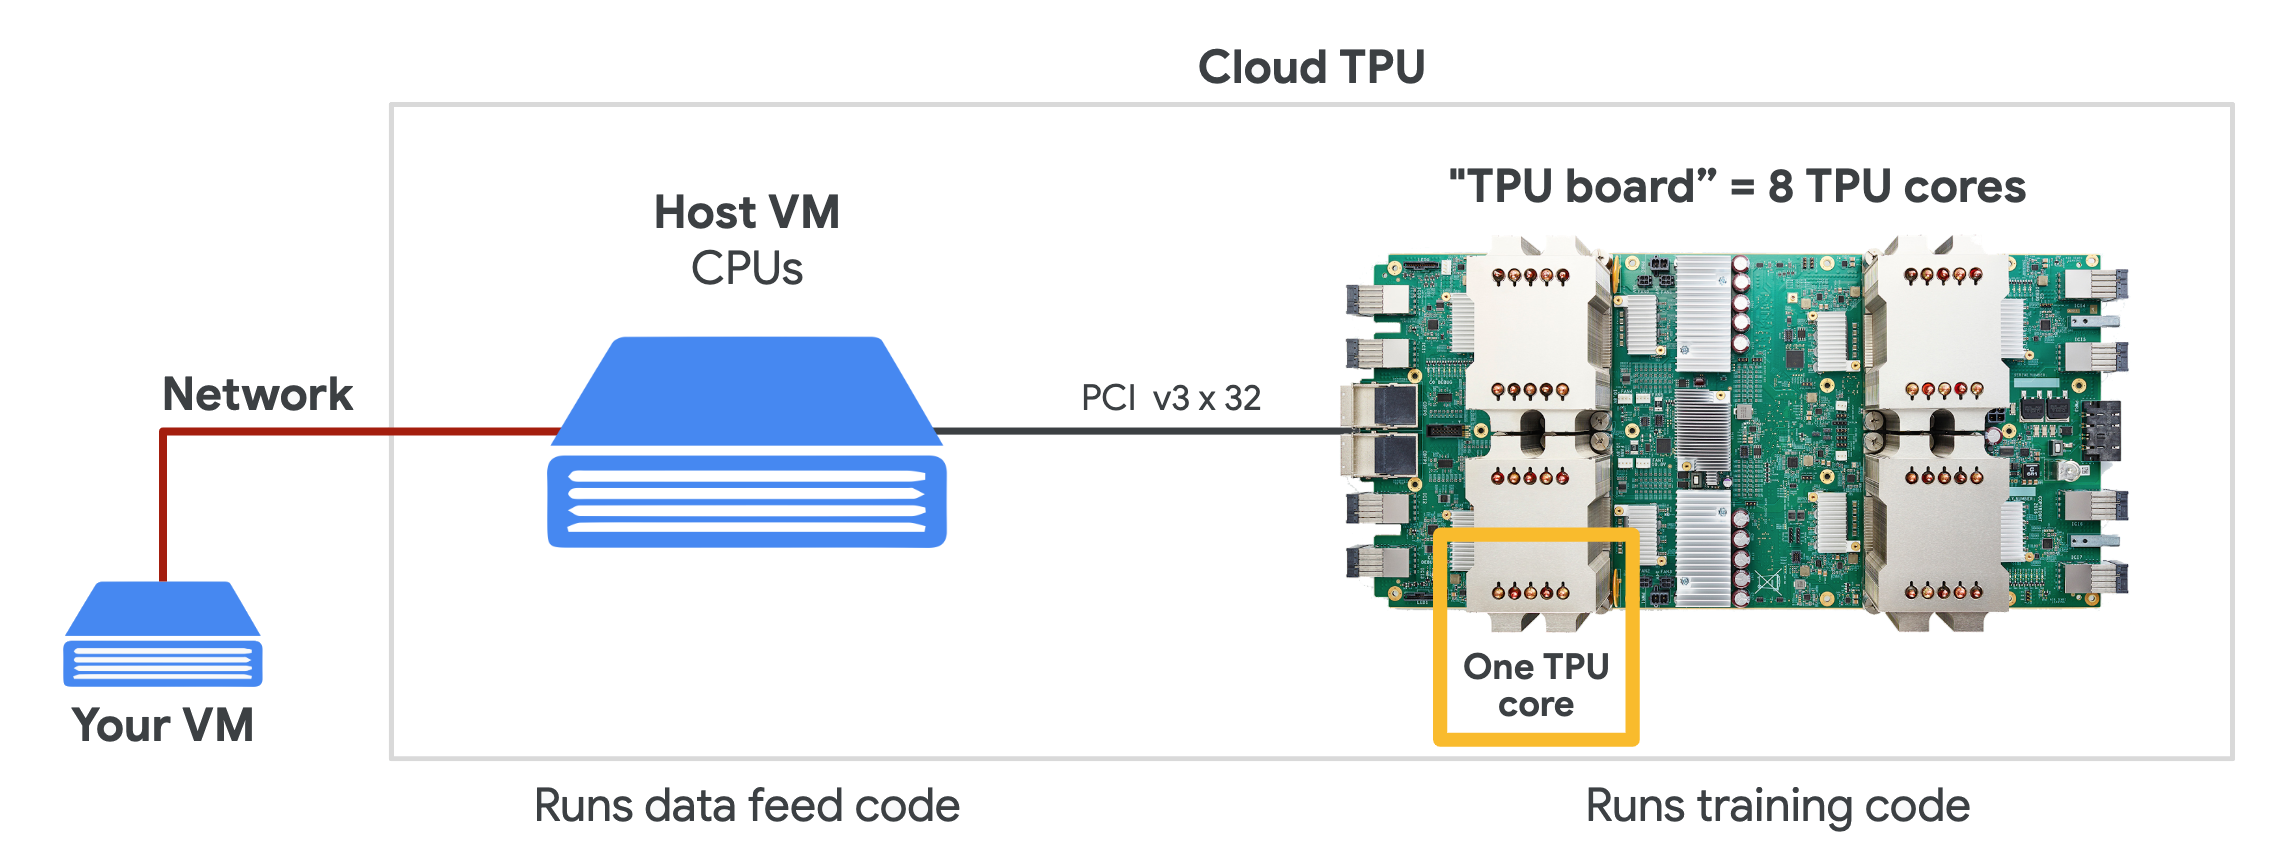 ../../_images/cloud-tpu-architecture.png